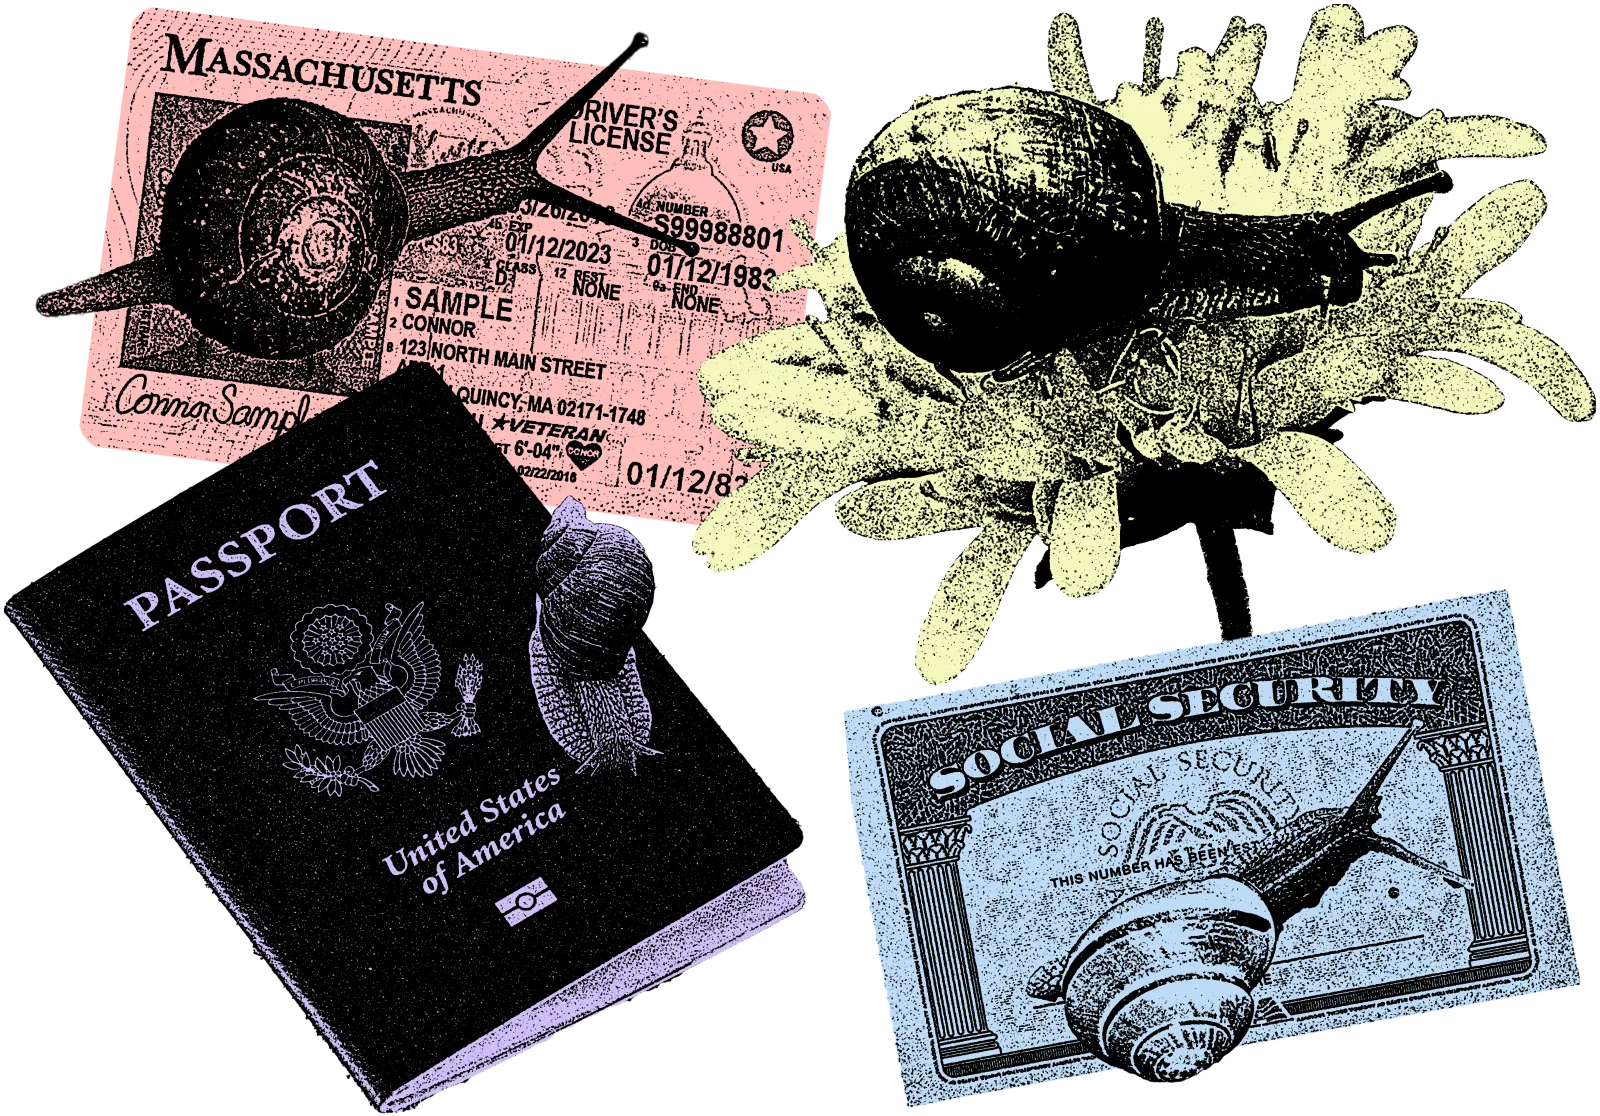 A social security card, a passport, a Massachusetts state ID, and a flower. There is a snail on every object and they are styled with a photocopier aesthetic.